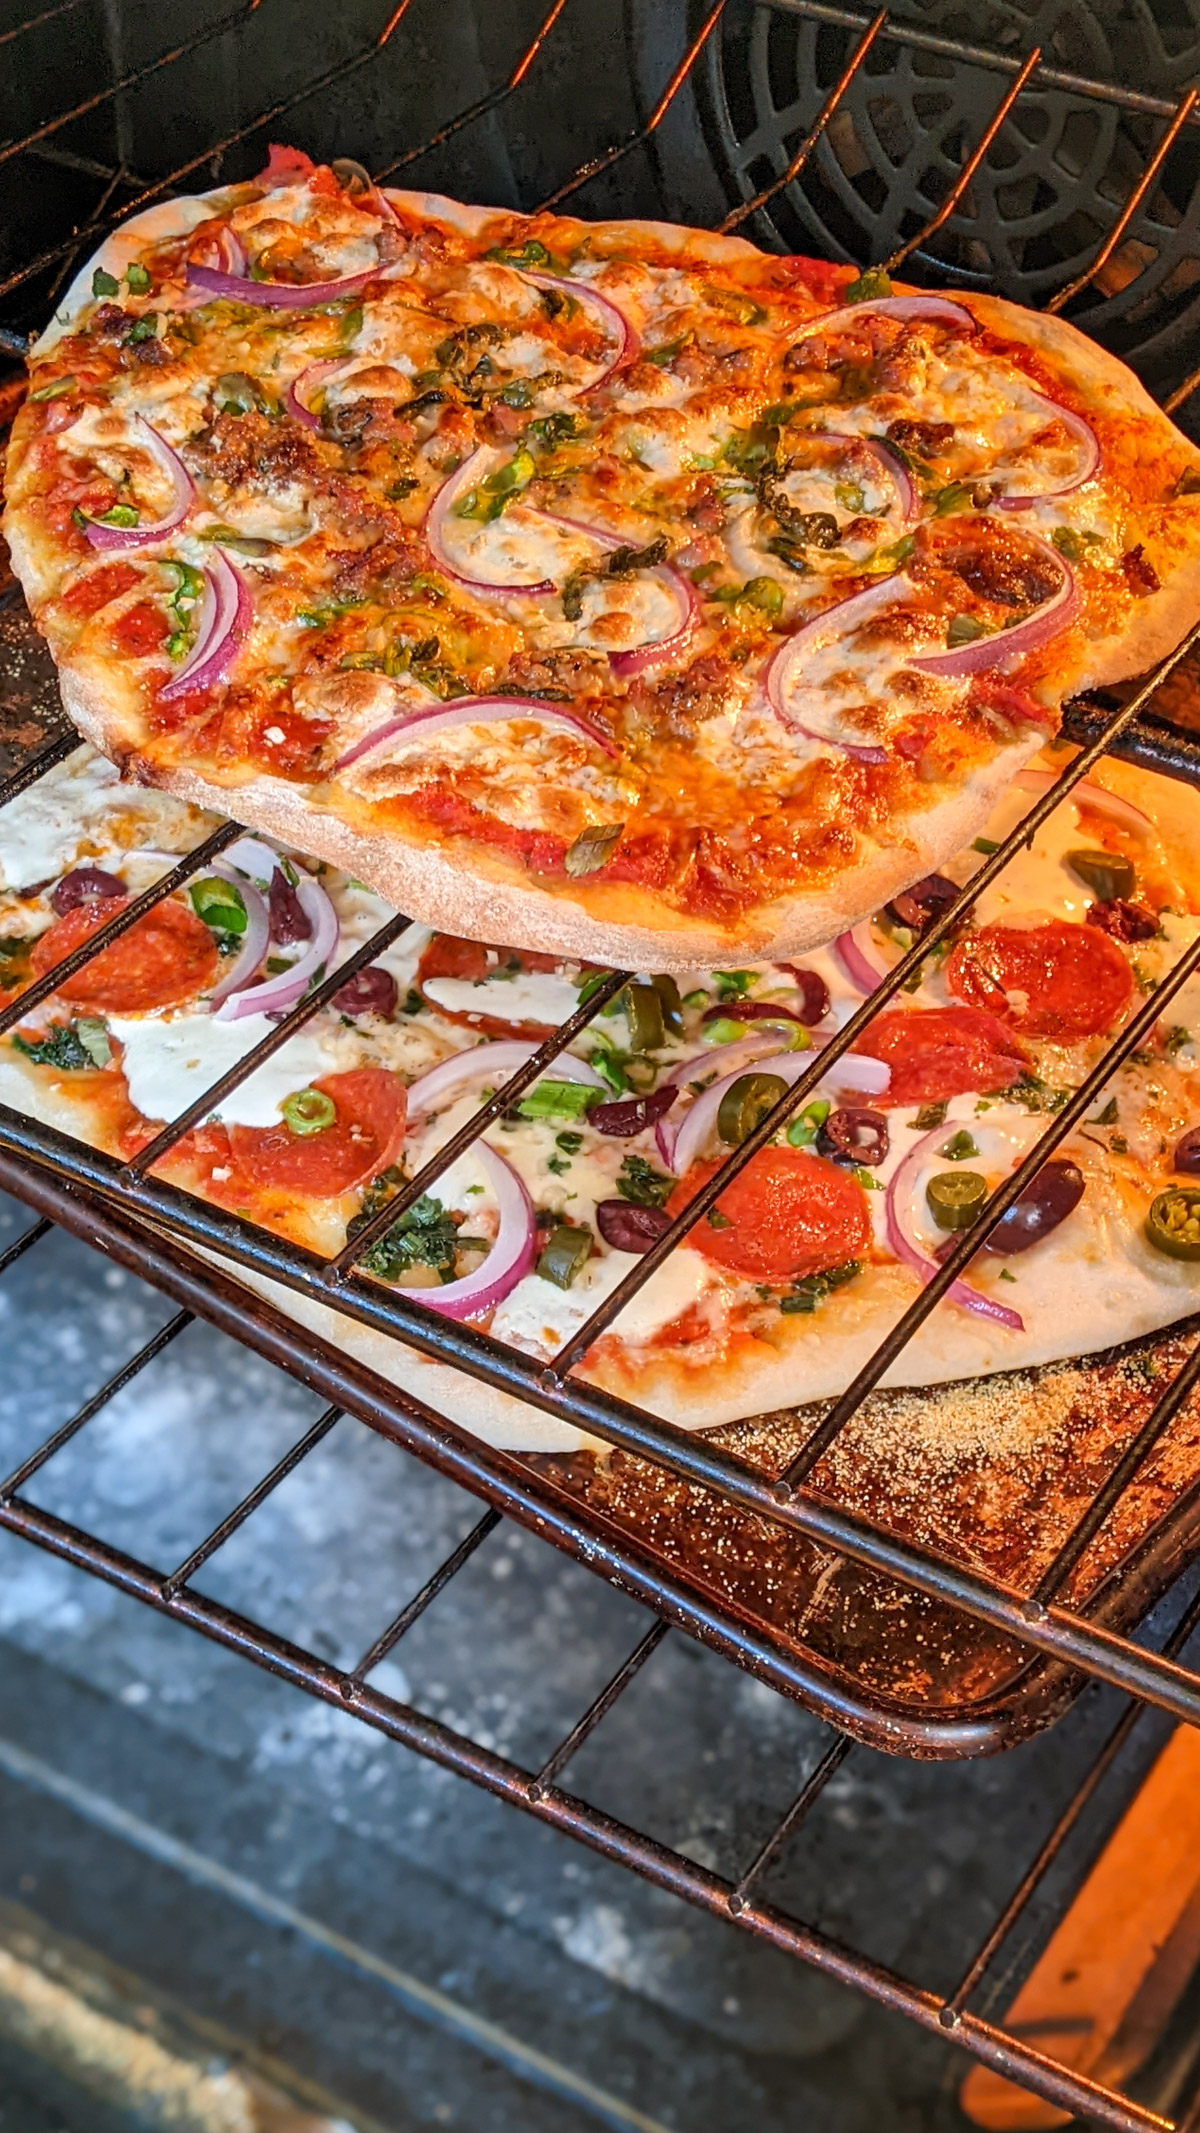 Baking 2 homemade pizzas in the oven on a sheet pan and directly on the oven rack.